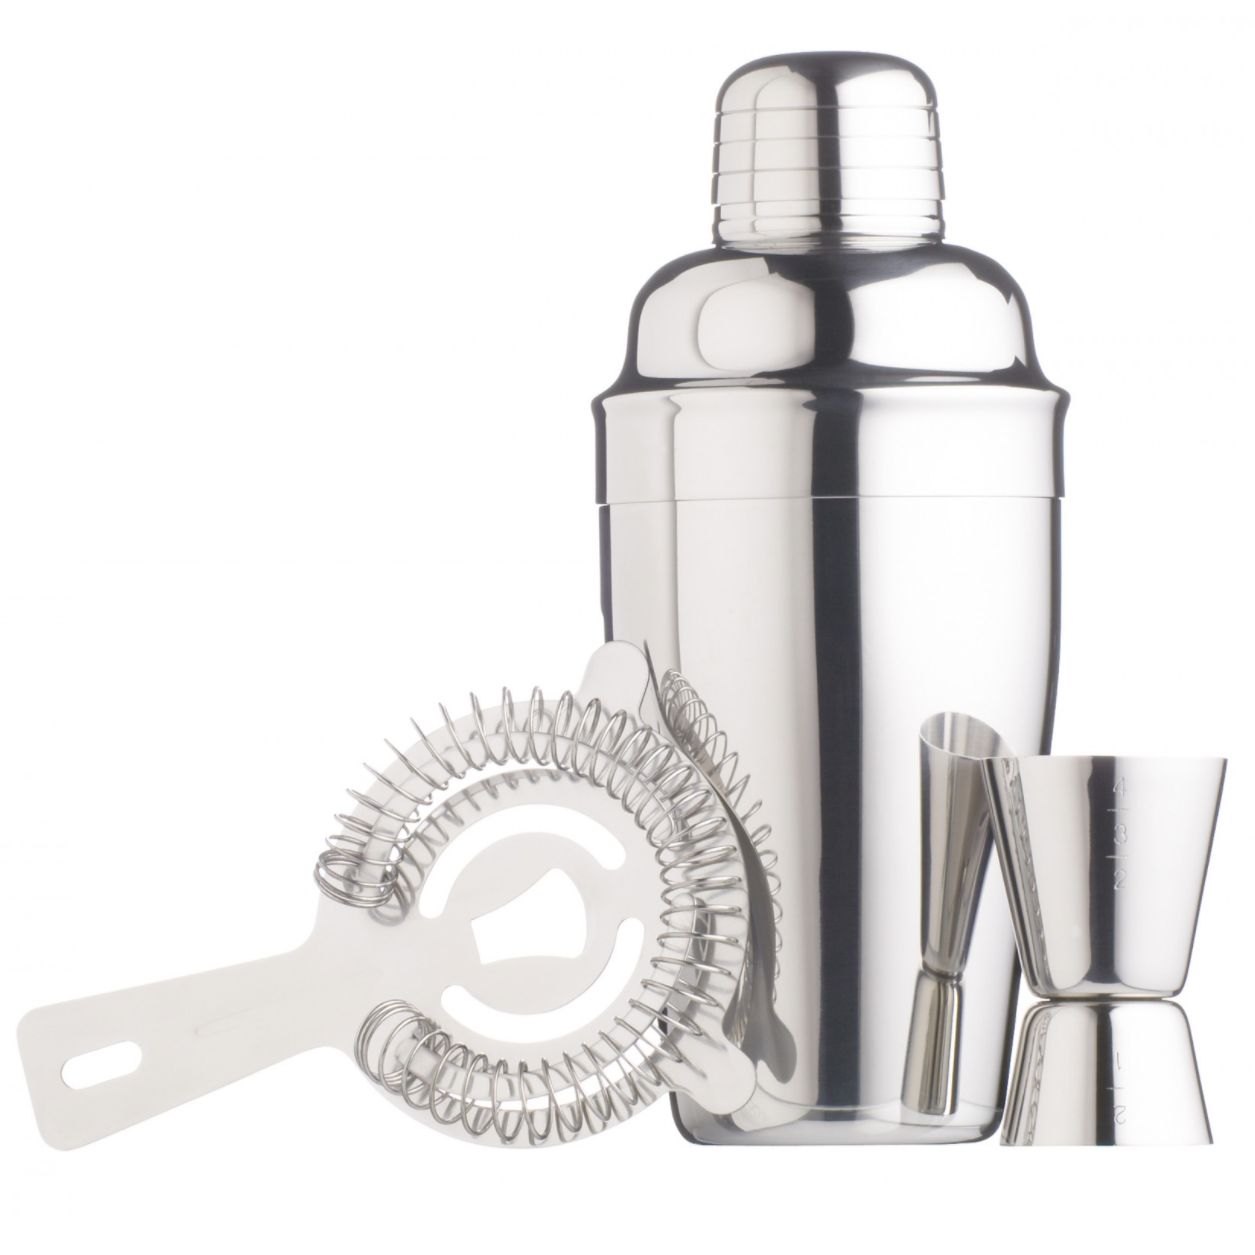 Barcraft - Stainless Steel Cocktail Kit - 3 pieces